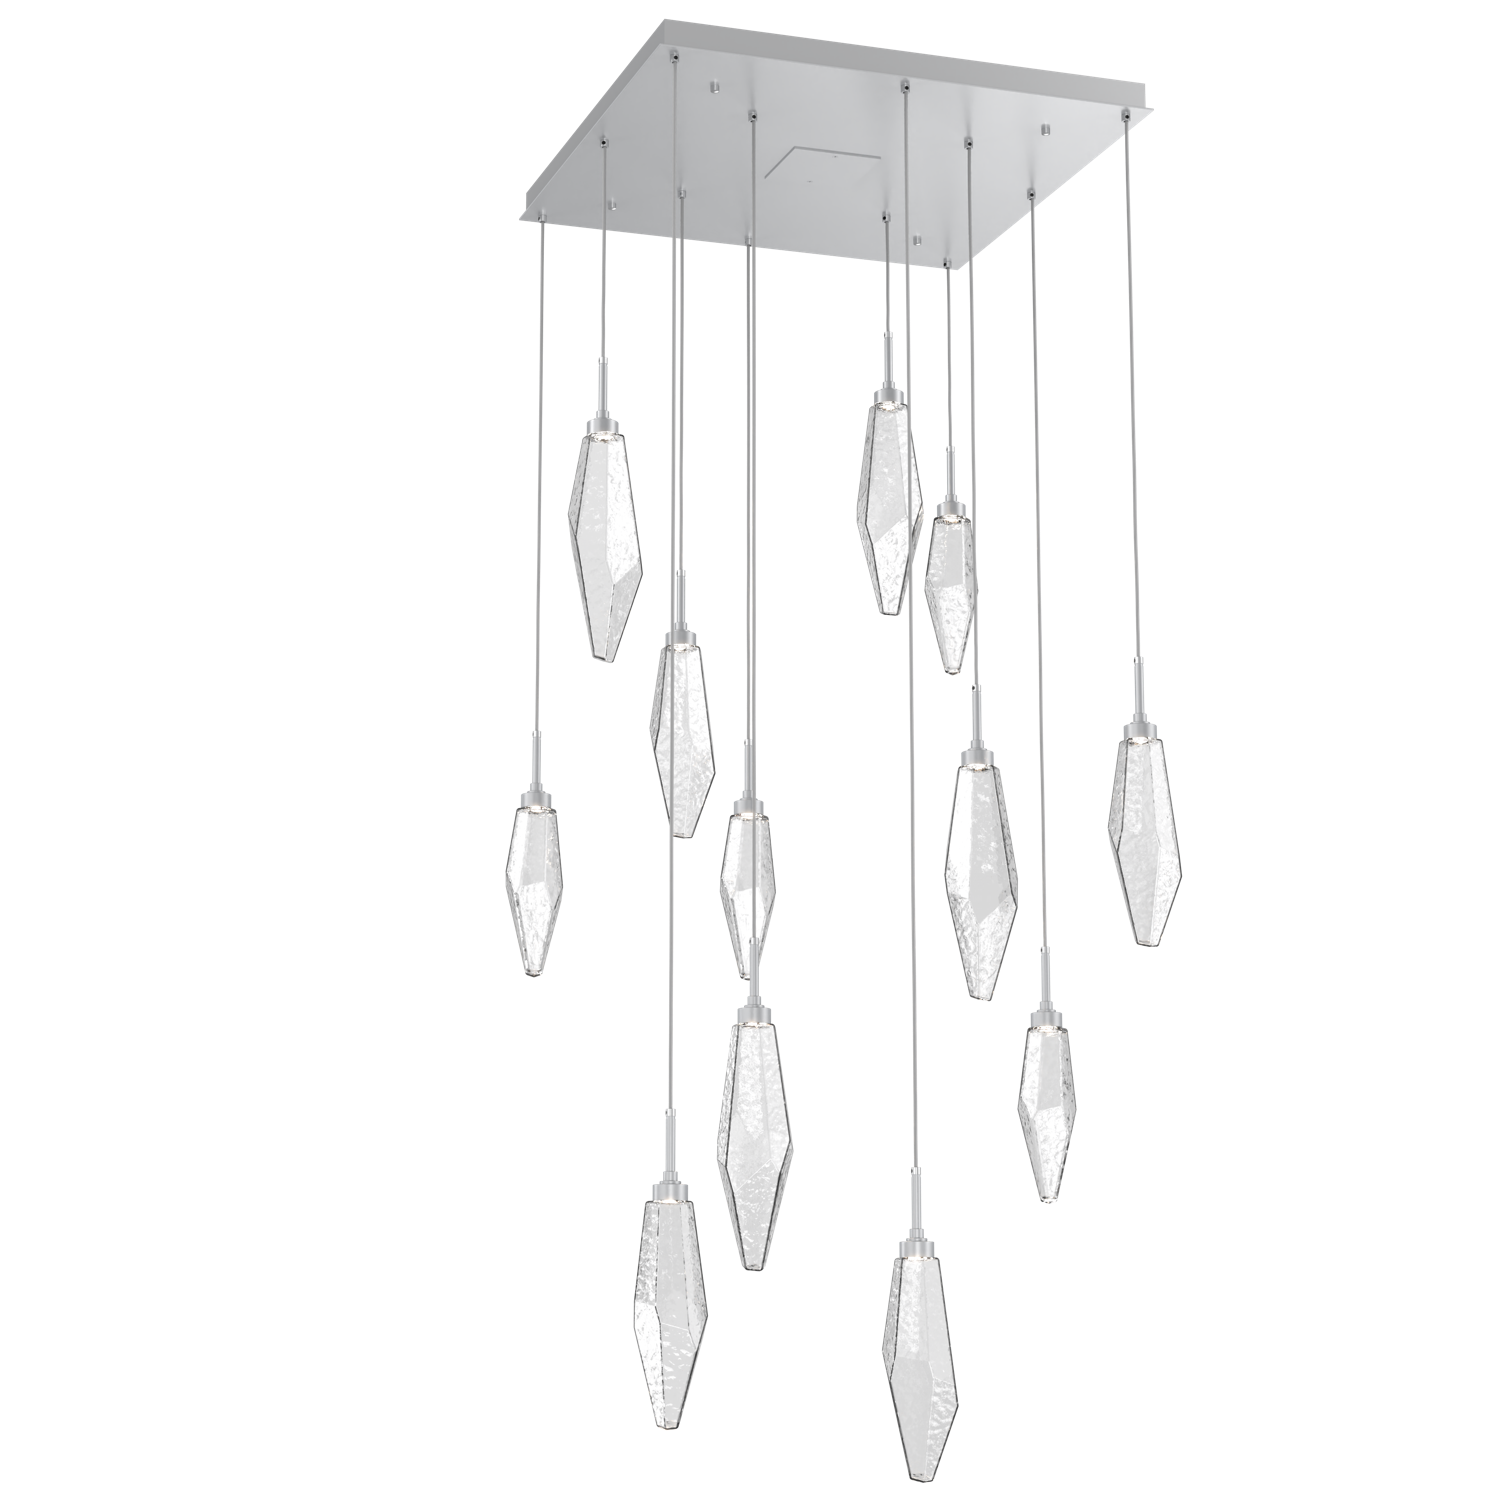 CHB0050-12-CS-CC-Hammerton-Studio-Rock-Crystal-12-light-square-pendant-chandelier-with-classic-silver-finish-and-clear-glass-shades-and-LED-lamping